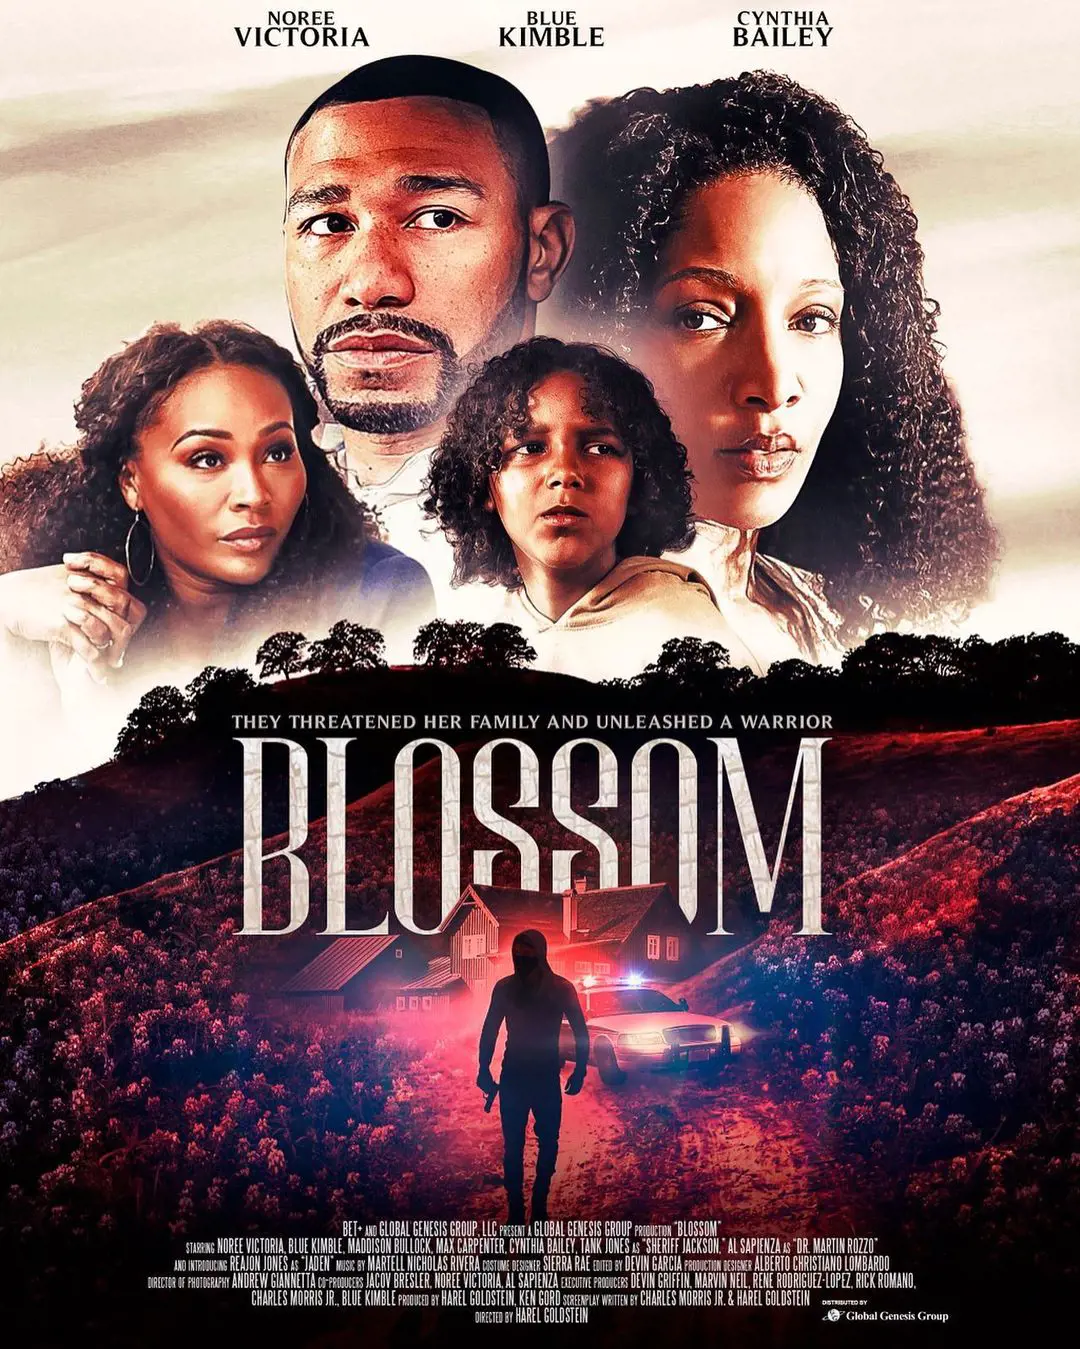 The Movie Blossom was released on Bet Plus on January 26, 2023